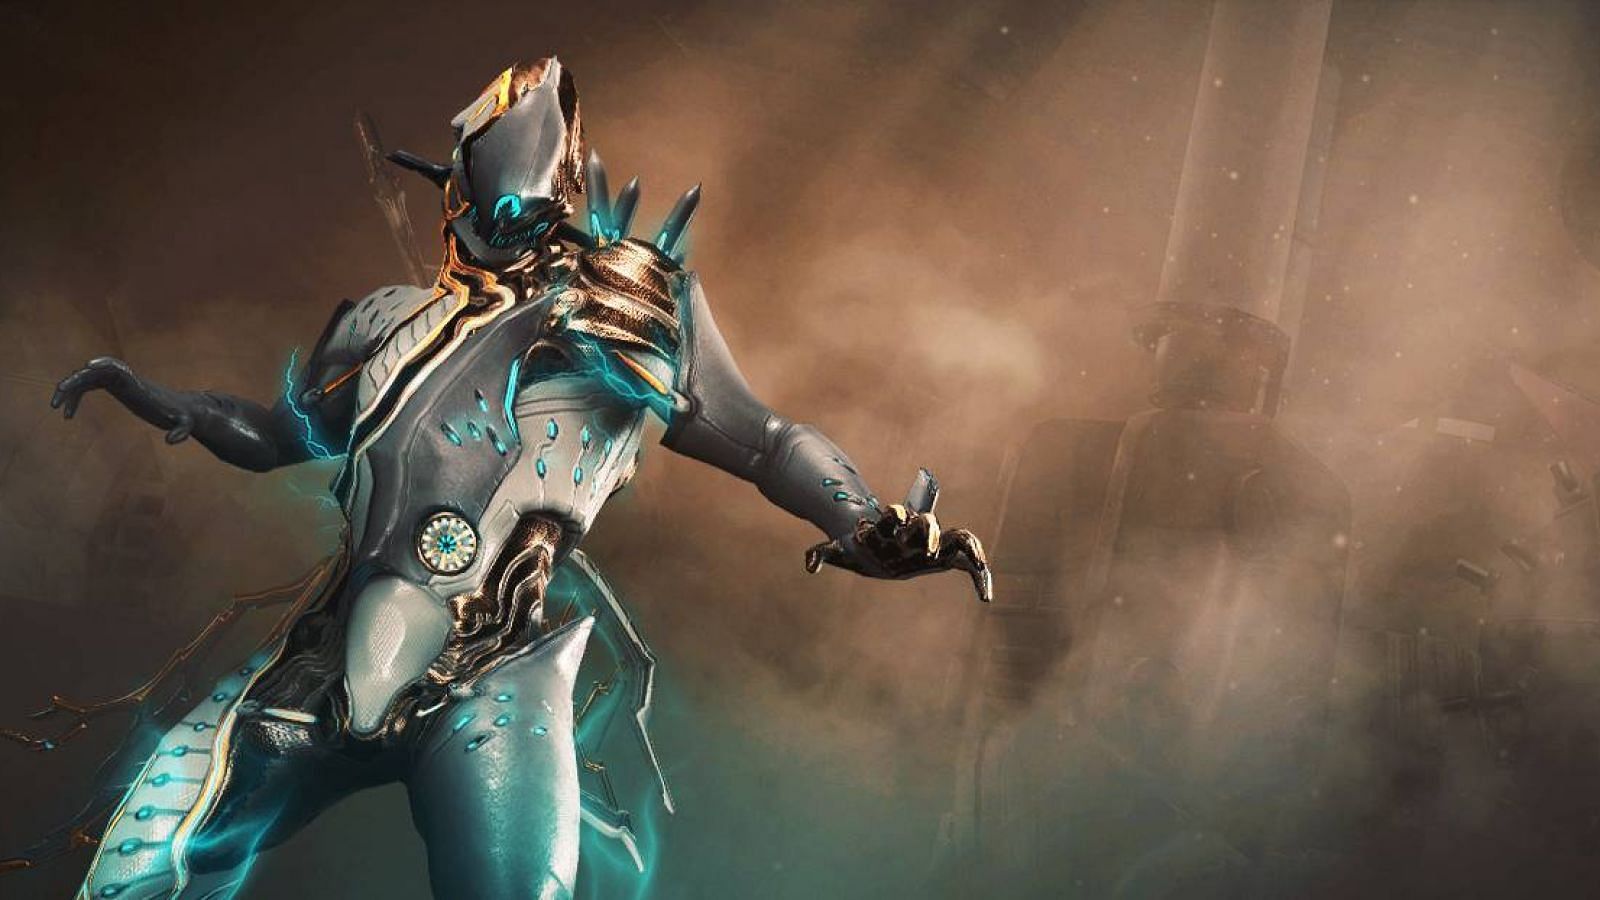 Volt Proto Skin can be purchased for 165 Platinums from the Market (Image via Digital Extremes)